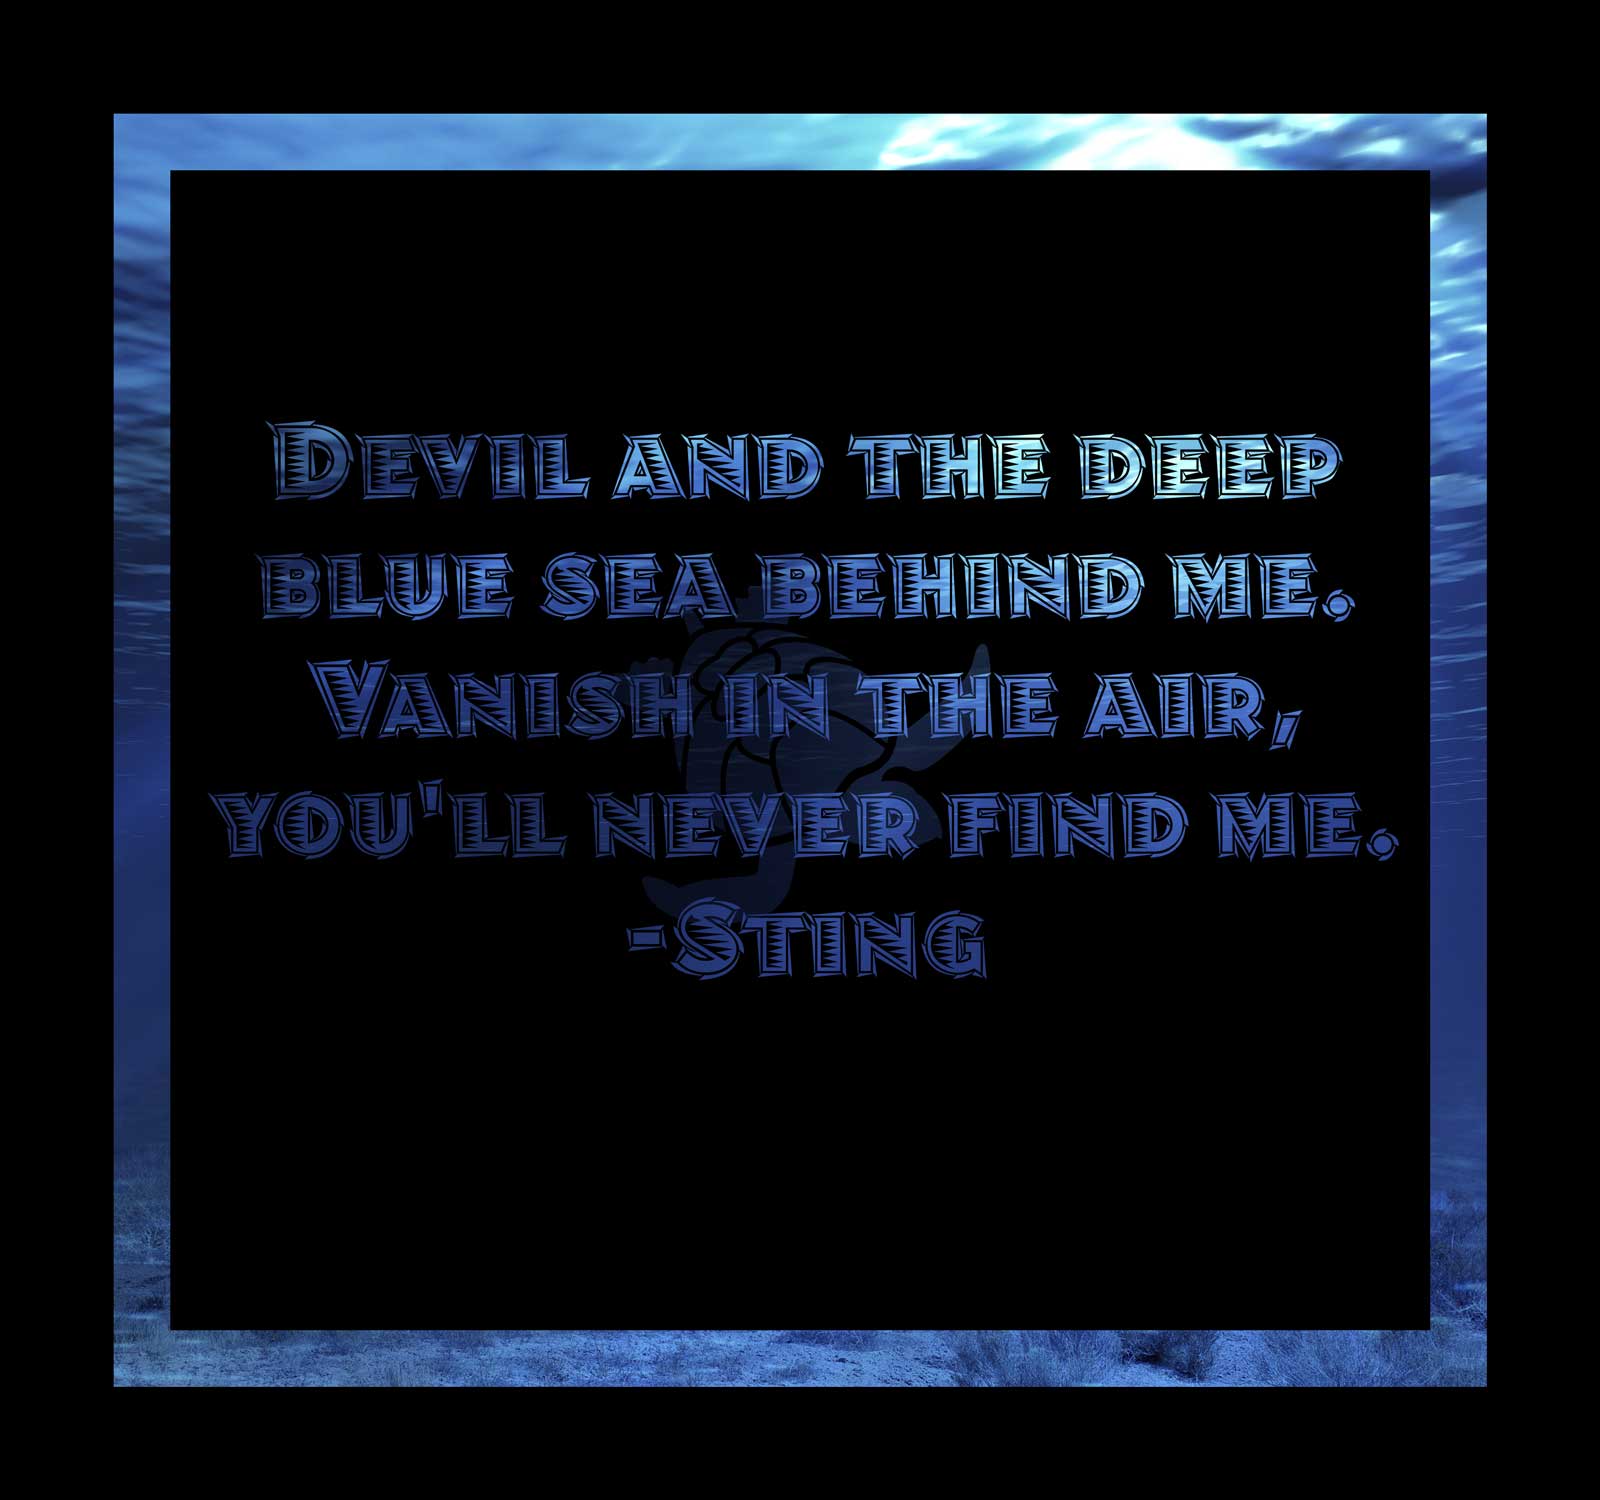 devil and the deep blue sea